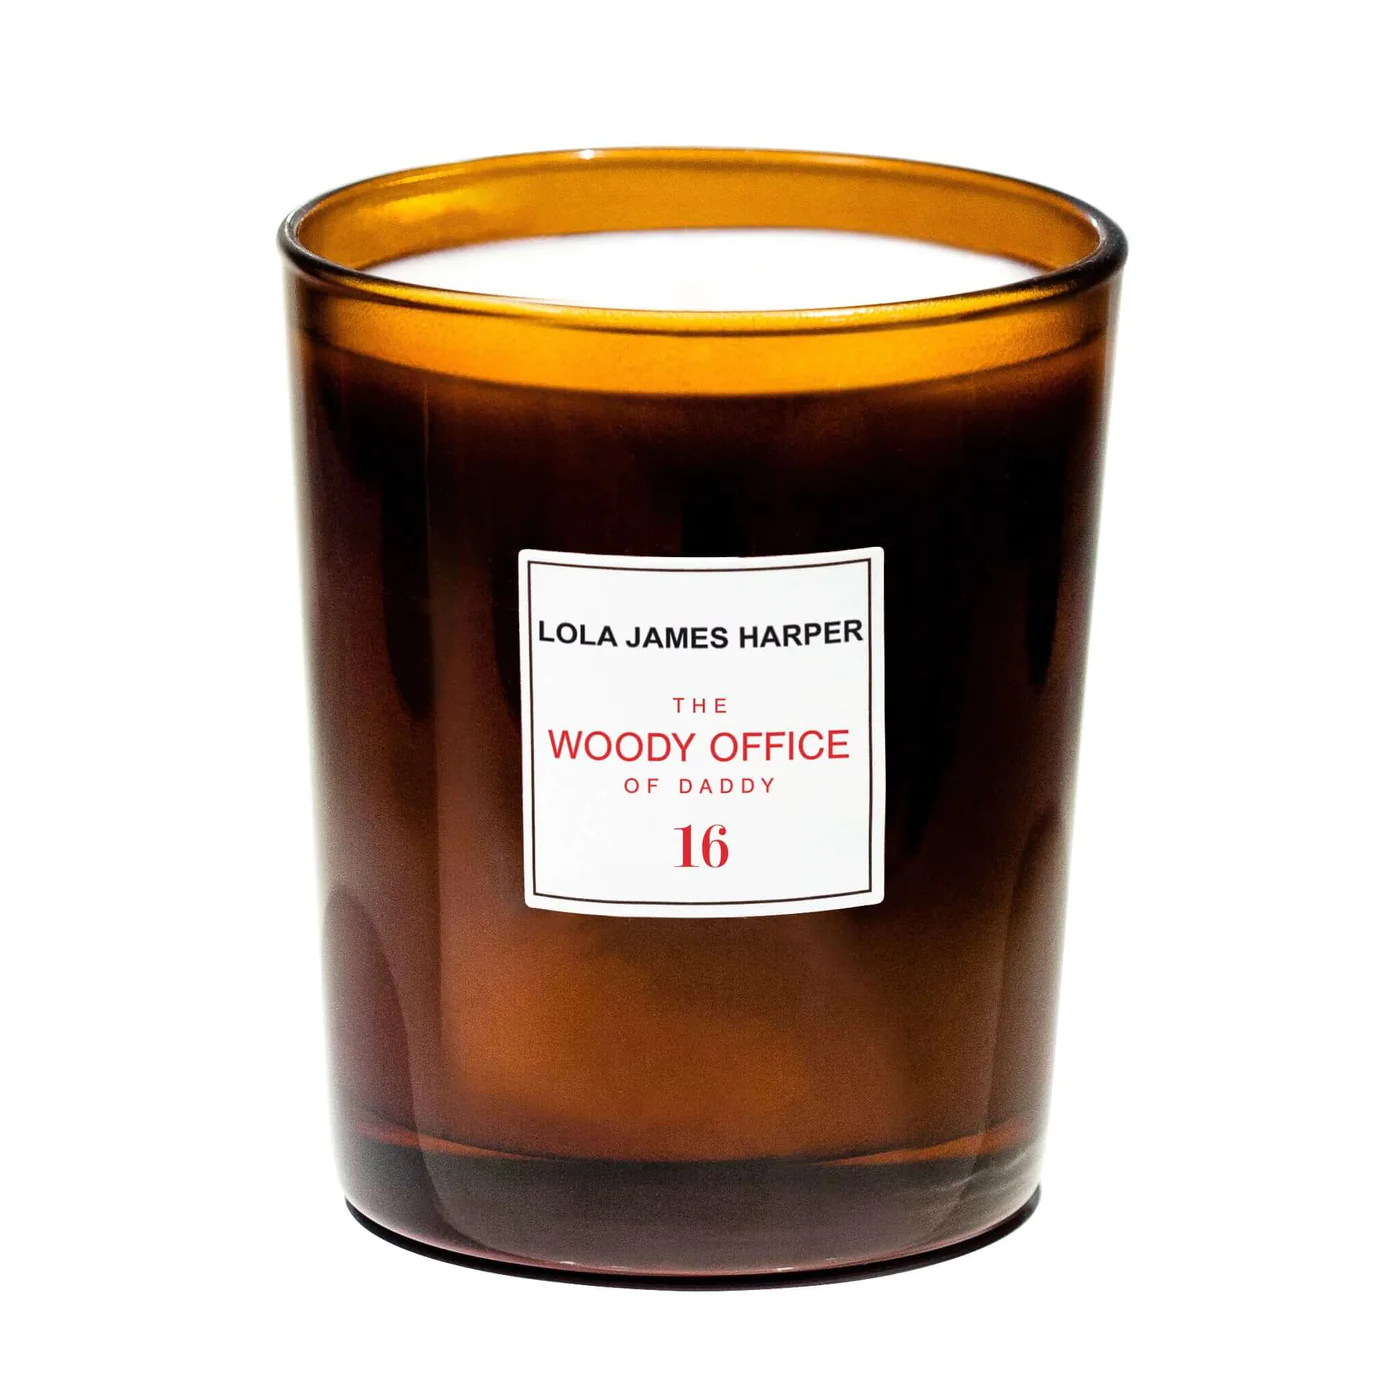 Lola James Harper Woody Office Candle 190